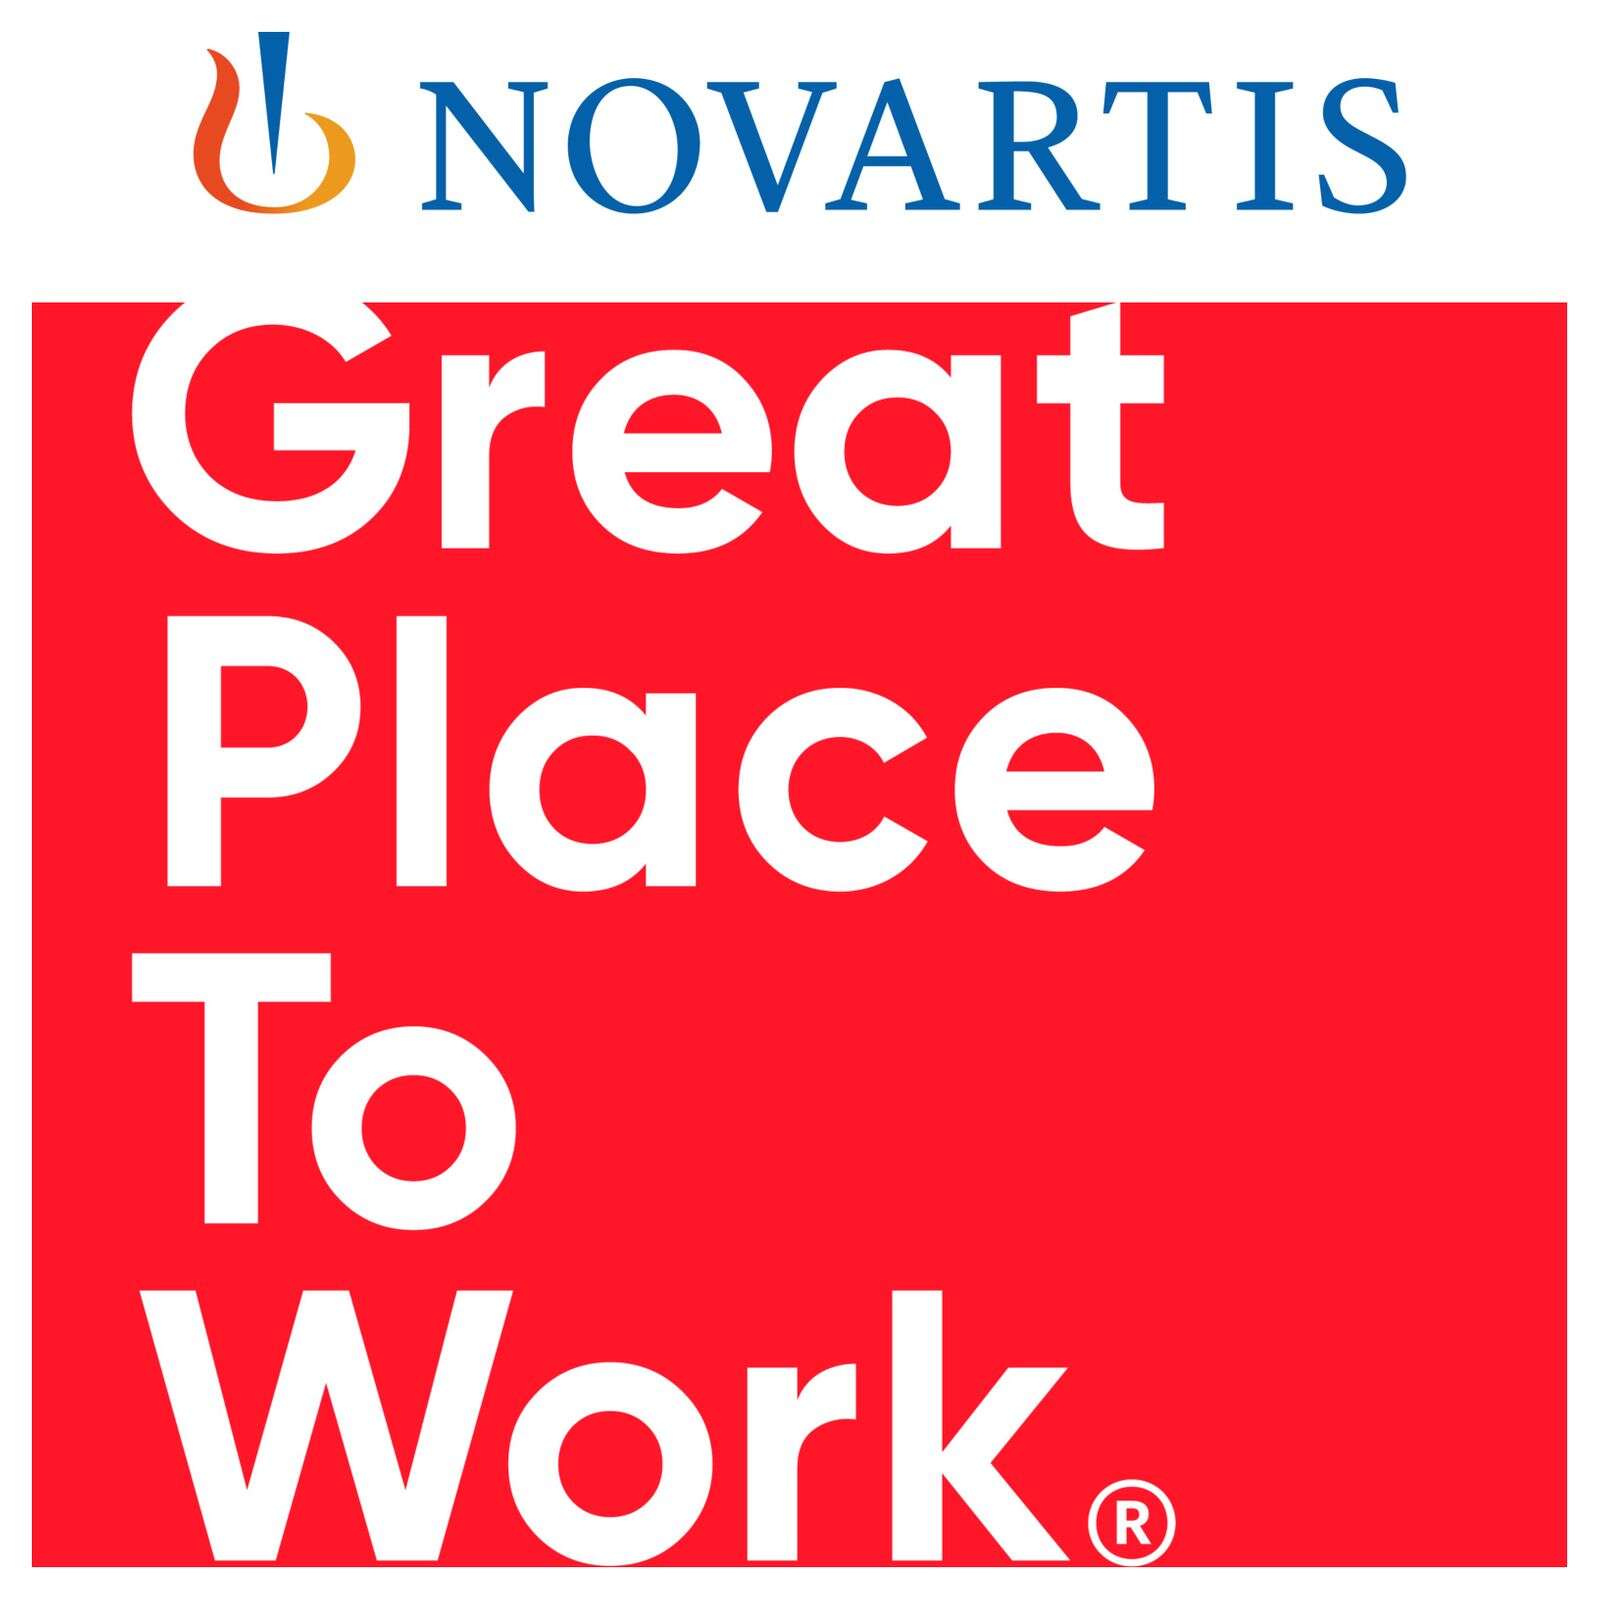 novartis uae and kuwait certified as great place to work